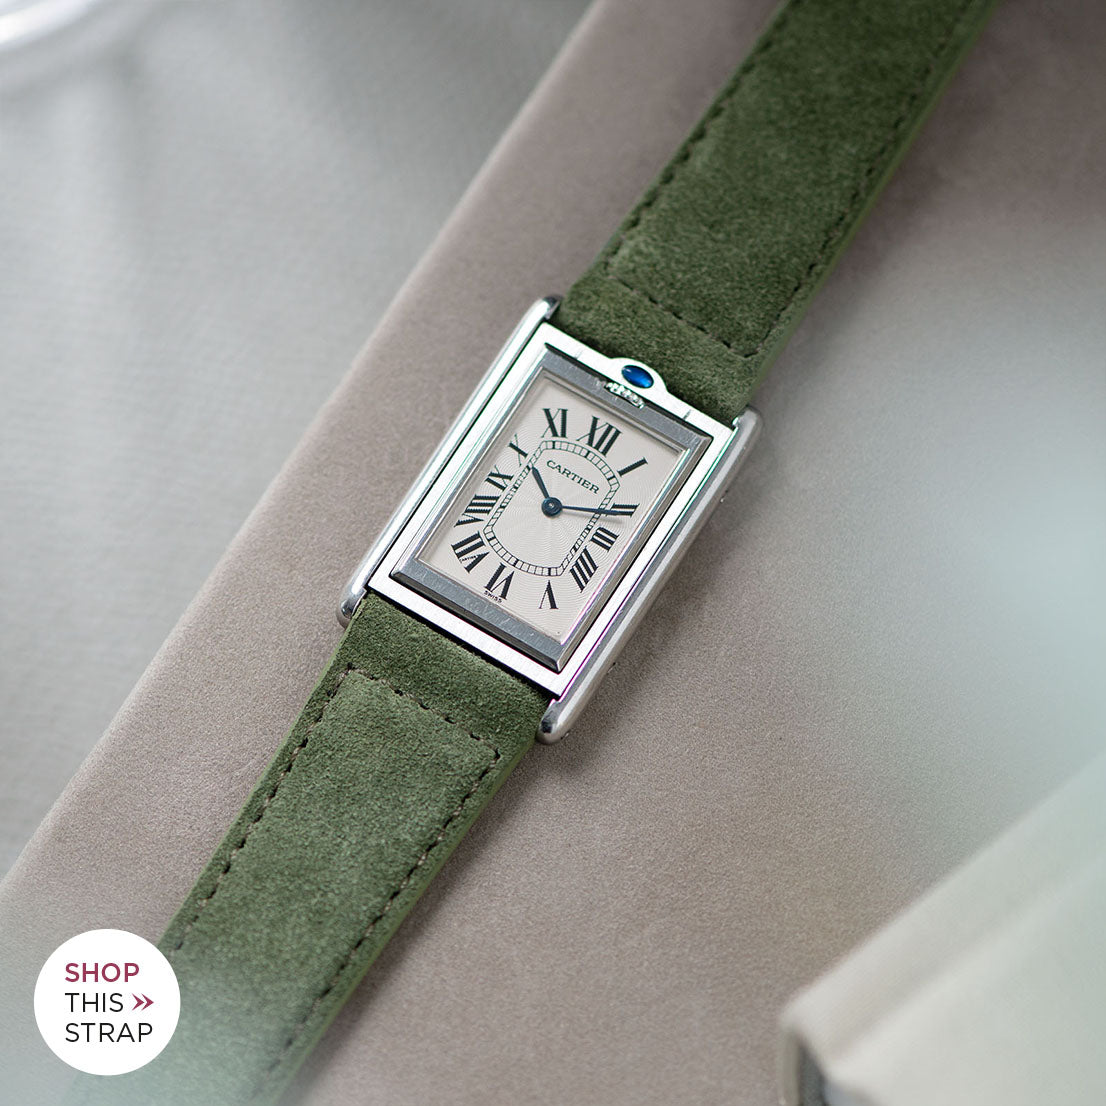 Bulang and Sons_Strap Guide_The Cartier Tank Basculante 20 mm_Olive Drab Green Suede Leather Watch Strap